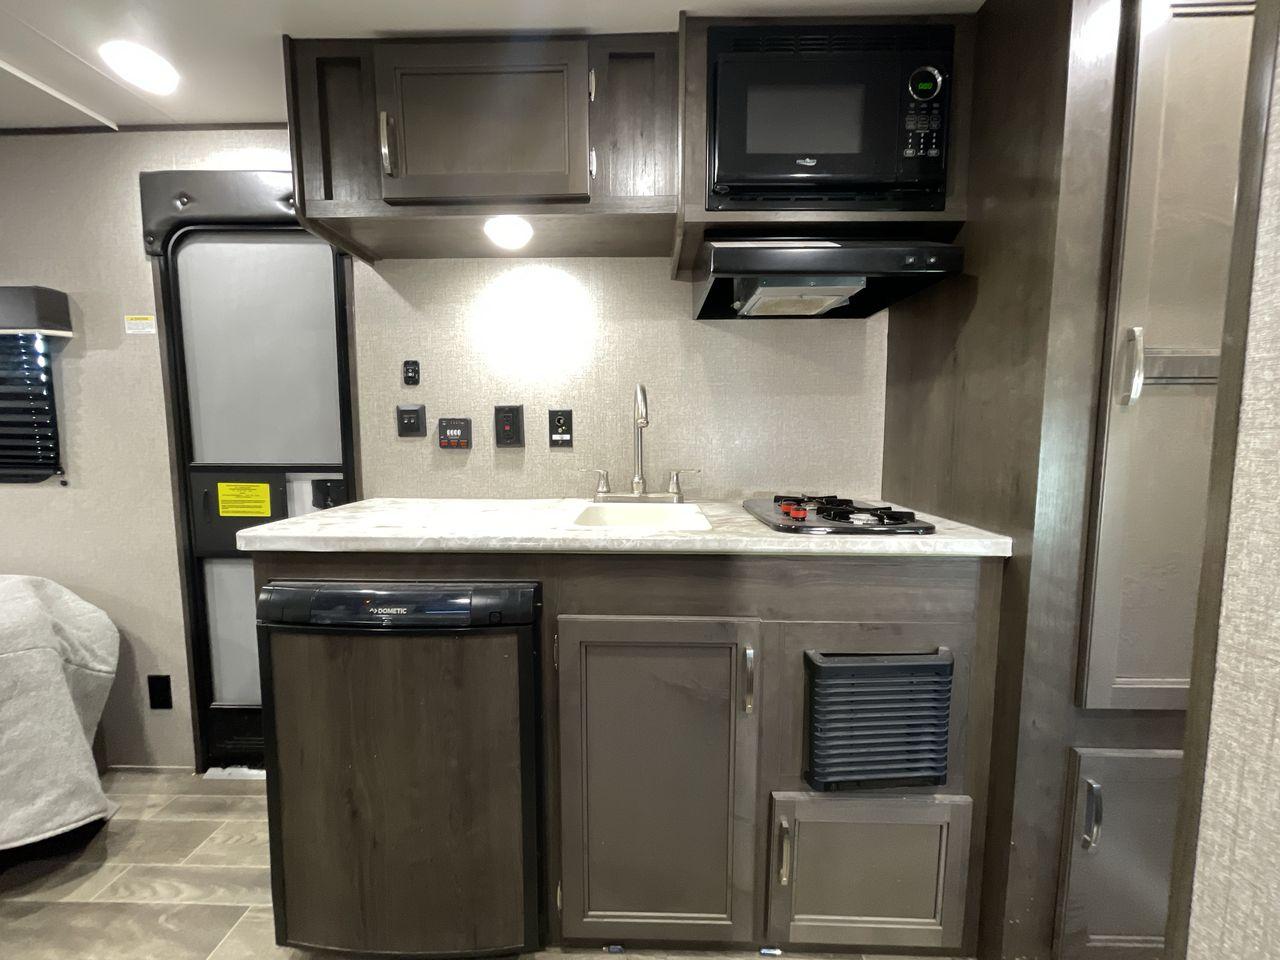 2021 JAYCO JAY FLIGHT SLX 174BH (1UJBJ0AJ1M1) , Length: 21.67 ft | Dry Weight: 3,075 lbs | GVWR: 3,950 lbs | Slides: 0 transmission, located at 4319 N Main St, Cleburne, TX, 76033, (817) 678-5133, 32.385960, -97.391212 - Take the 2021 Jayco Jay Flight SLX 174BH travel trailer out on your camping adventures. This lightweight and small RV is ideal for people looking for an affordable and cozy way to enjoy the great outdoors. The dimensions of this unit are 21.67 ft in length, 7.08 ft in width, and 9.17 ft in height. I - Photo #10